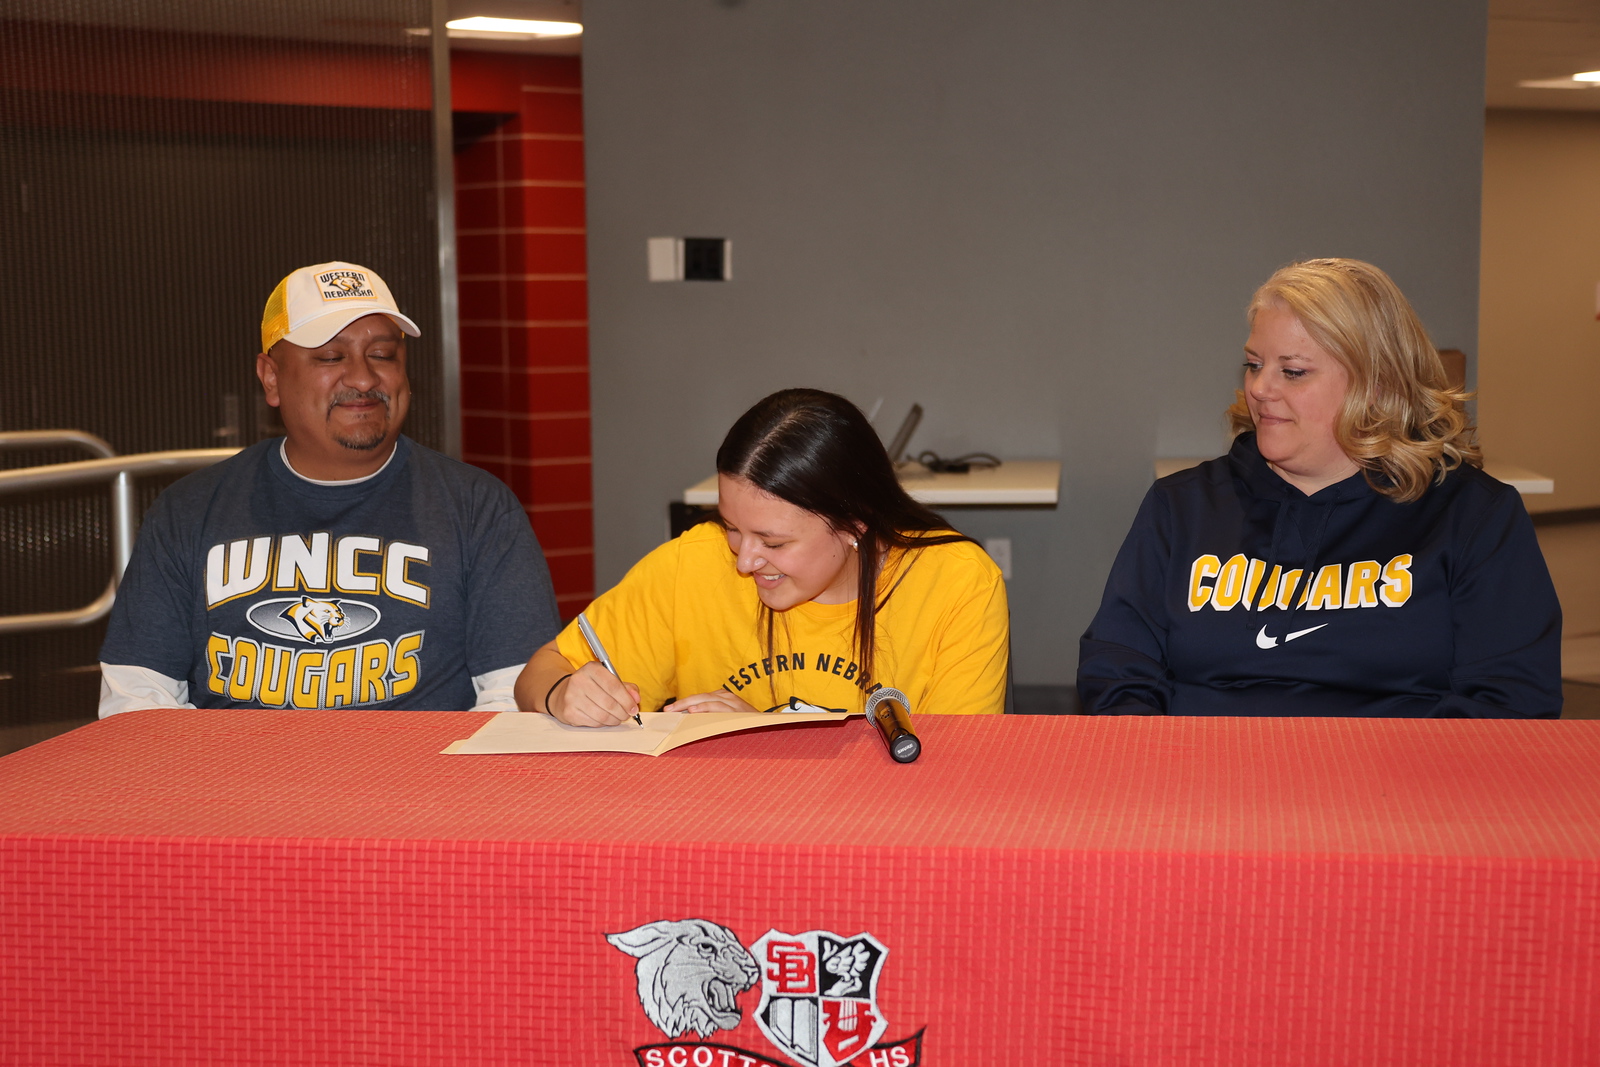 Scottsbluff's Mariah Russel signs to play soccer at WNCC.